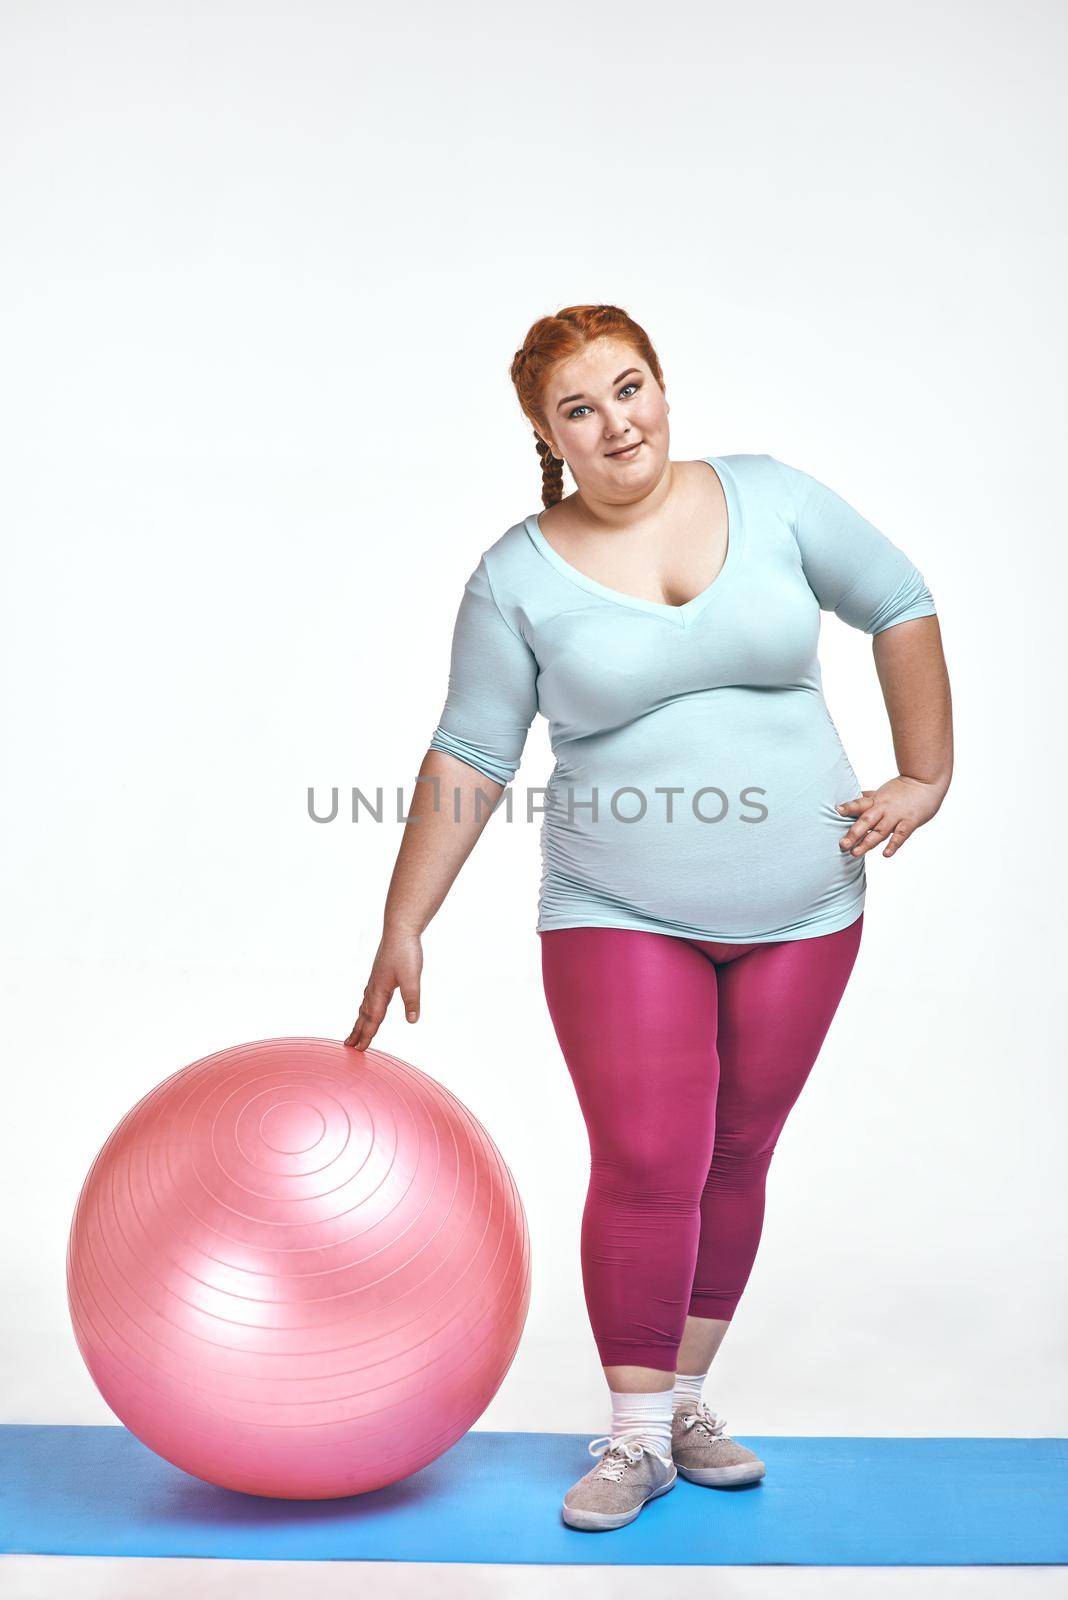 Funny picture of amusing, red haired, chubby woman on white background. Woman holding a ball